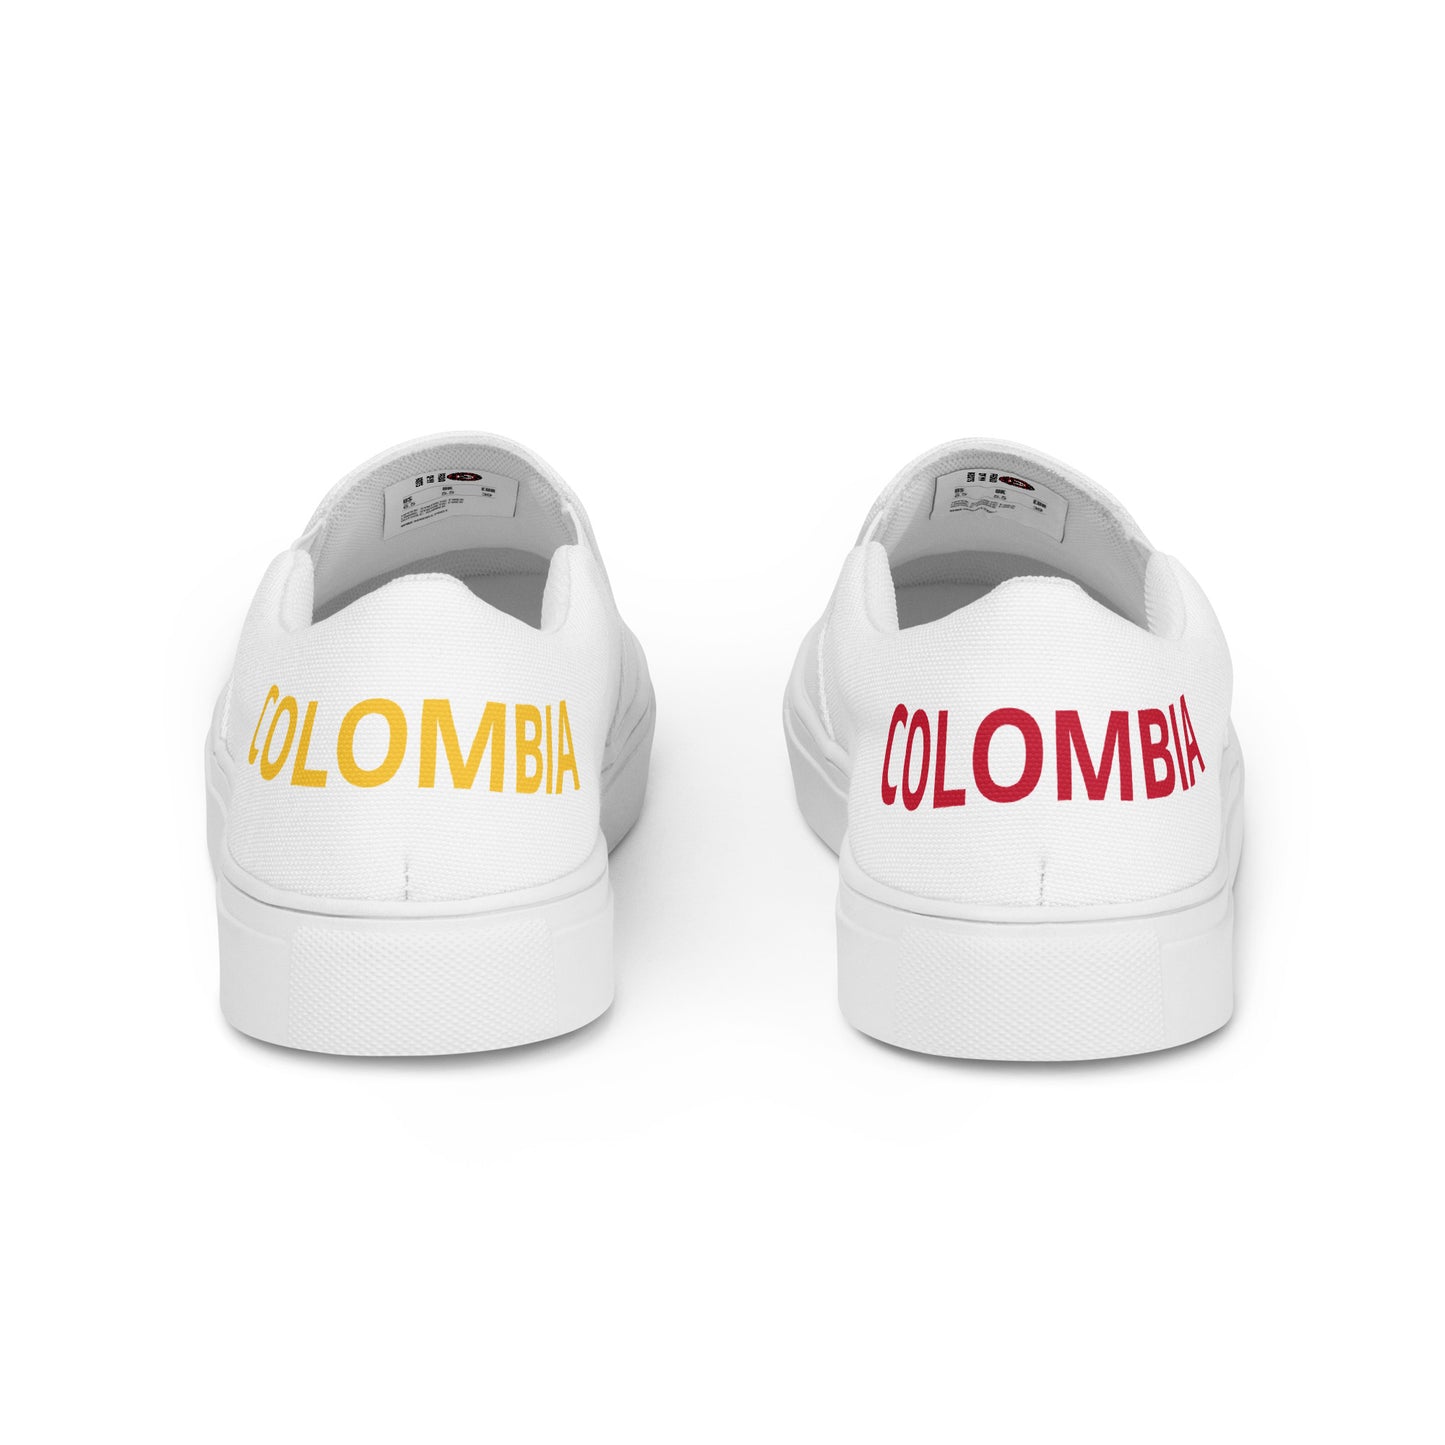 Colombia - Men - White - Slip-on shoes